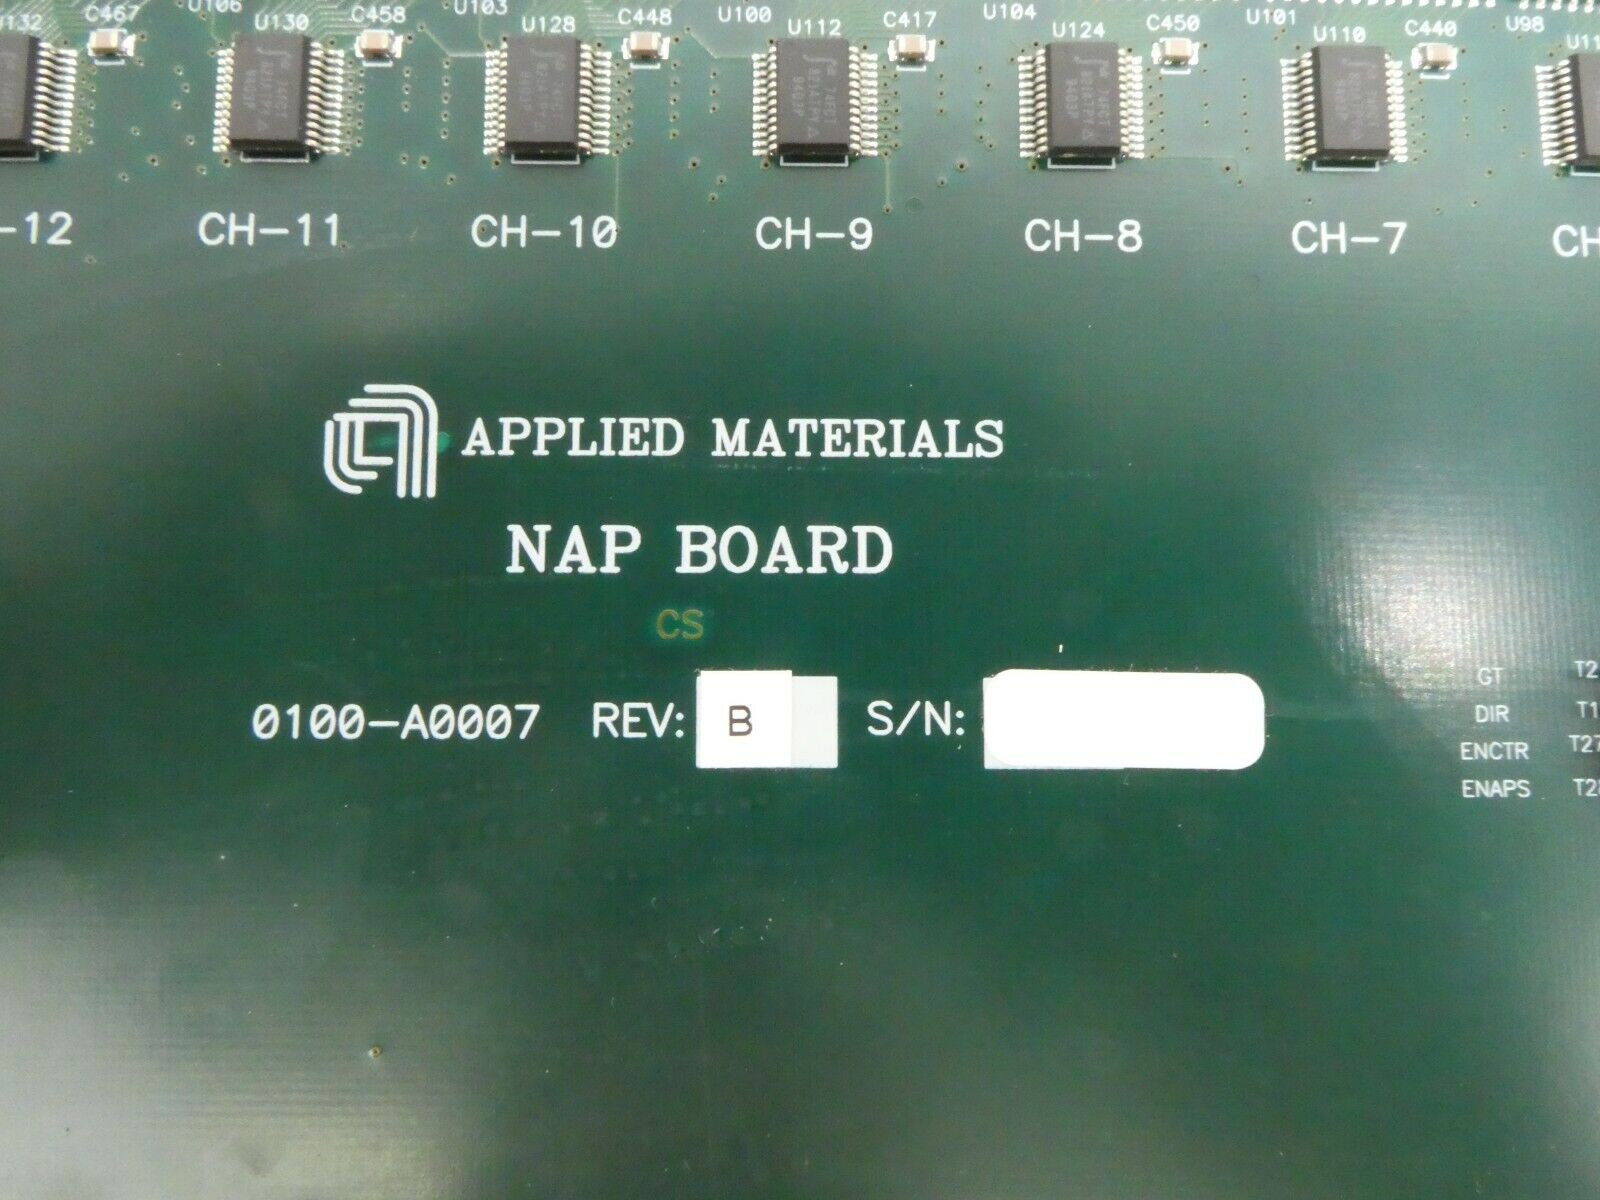 AMAT Applied Materials 0100-A0007 NAP Board PCB Card Rev. B 200mm Excite Working